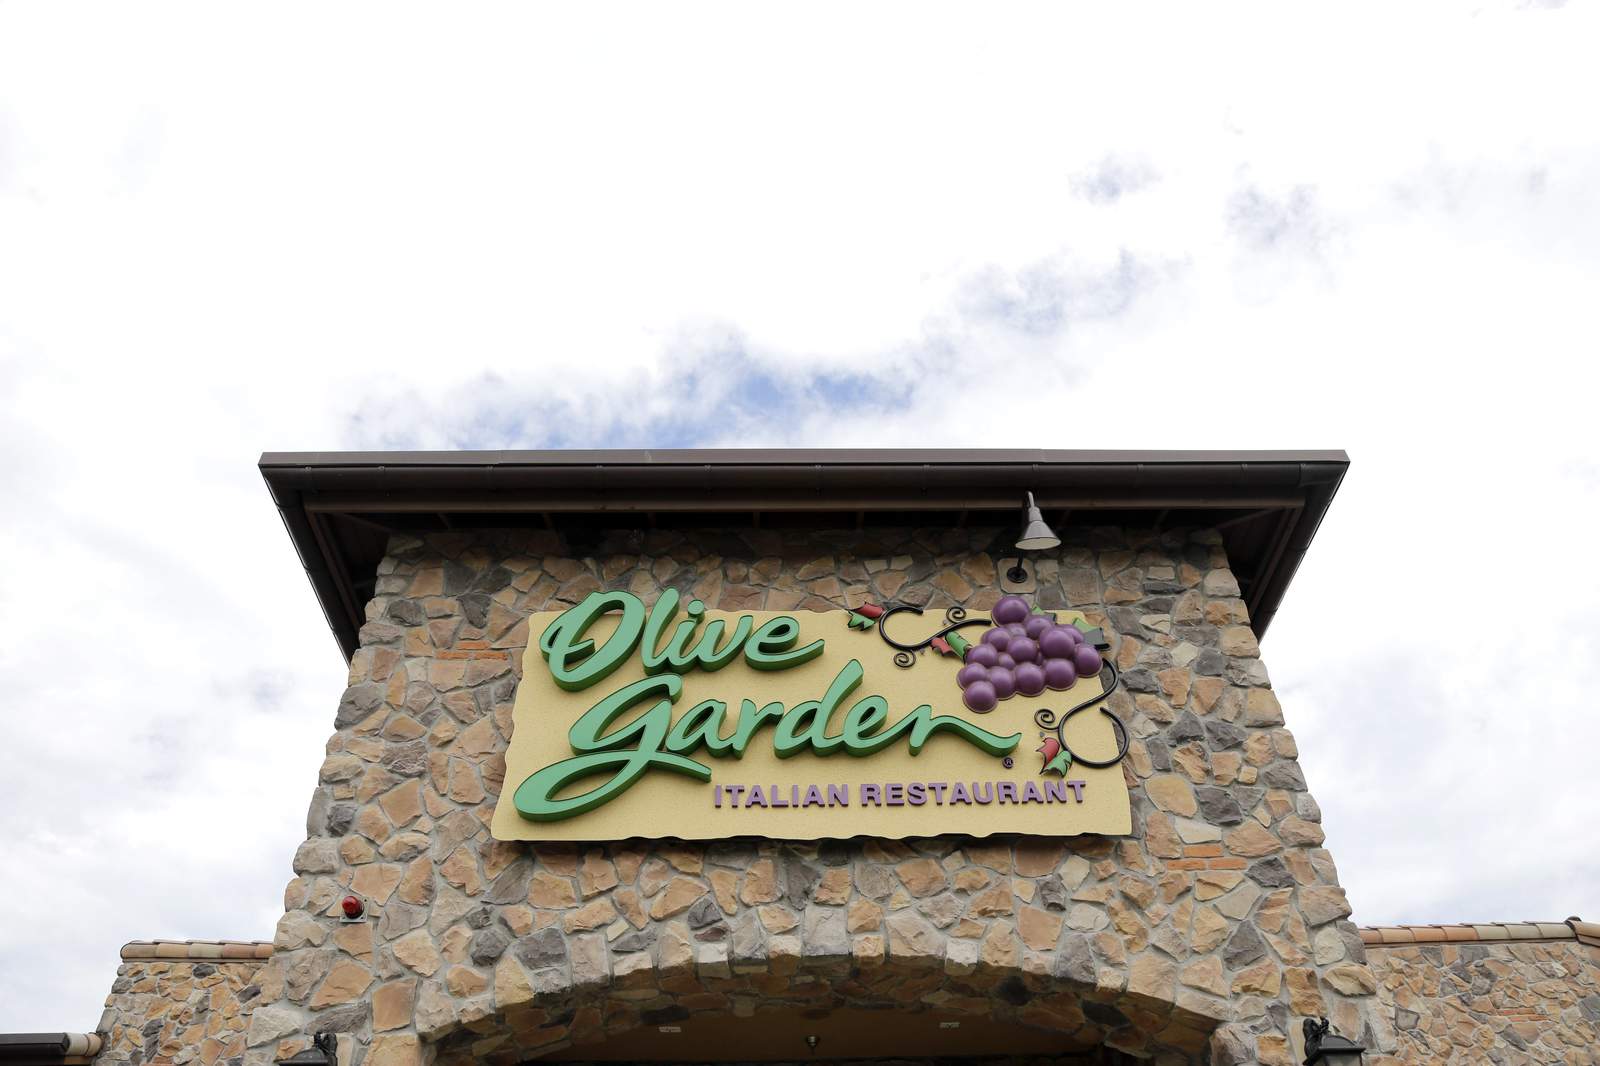 Free breadsticks and reasons for hope at Olive Garden